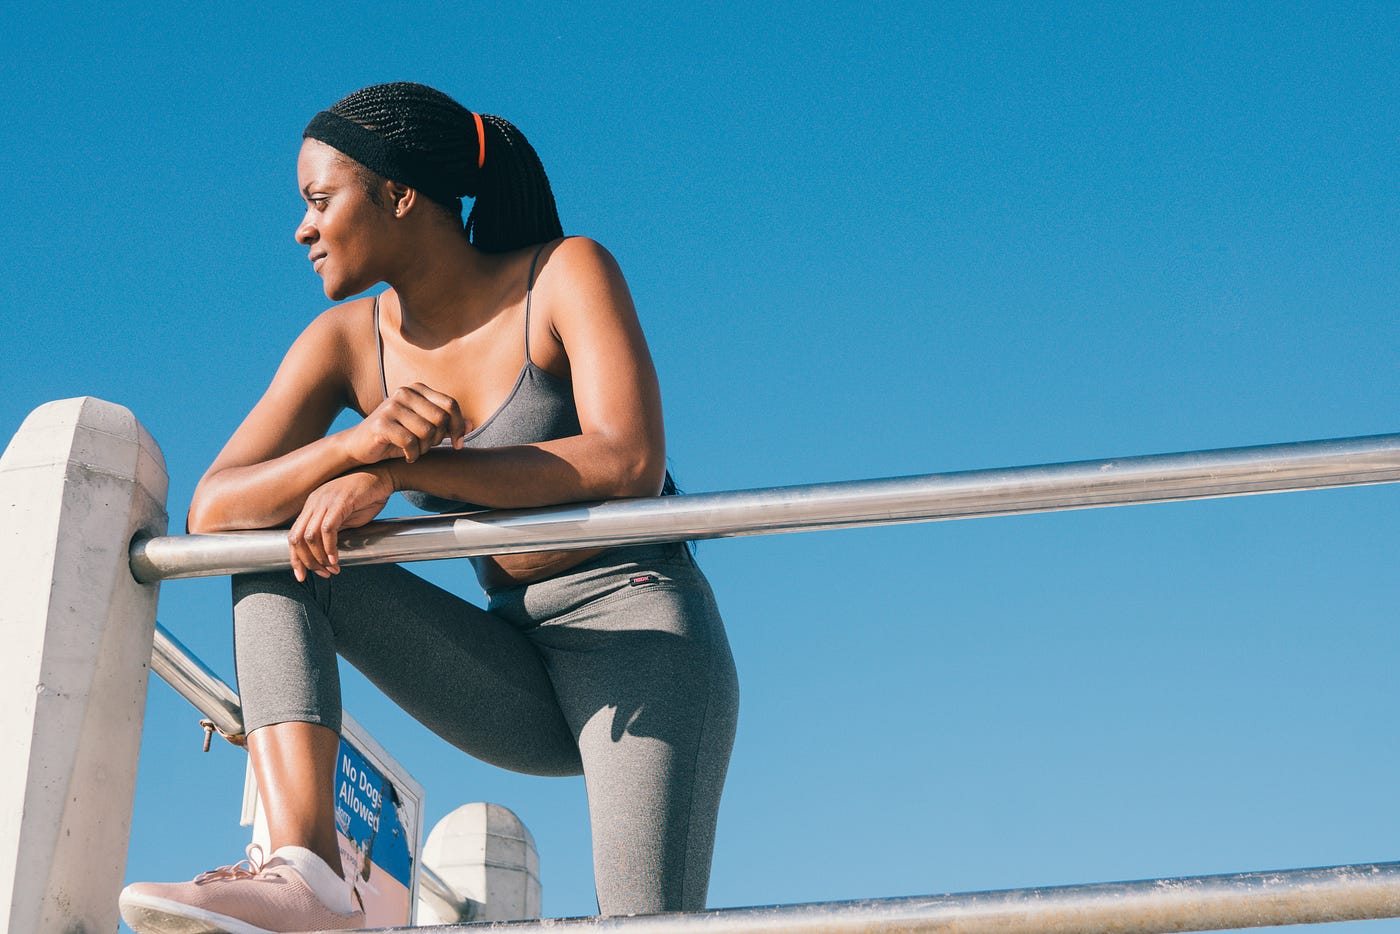 7 Small Things That Helped Me Become a Fitness Enthusiast